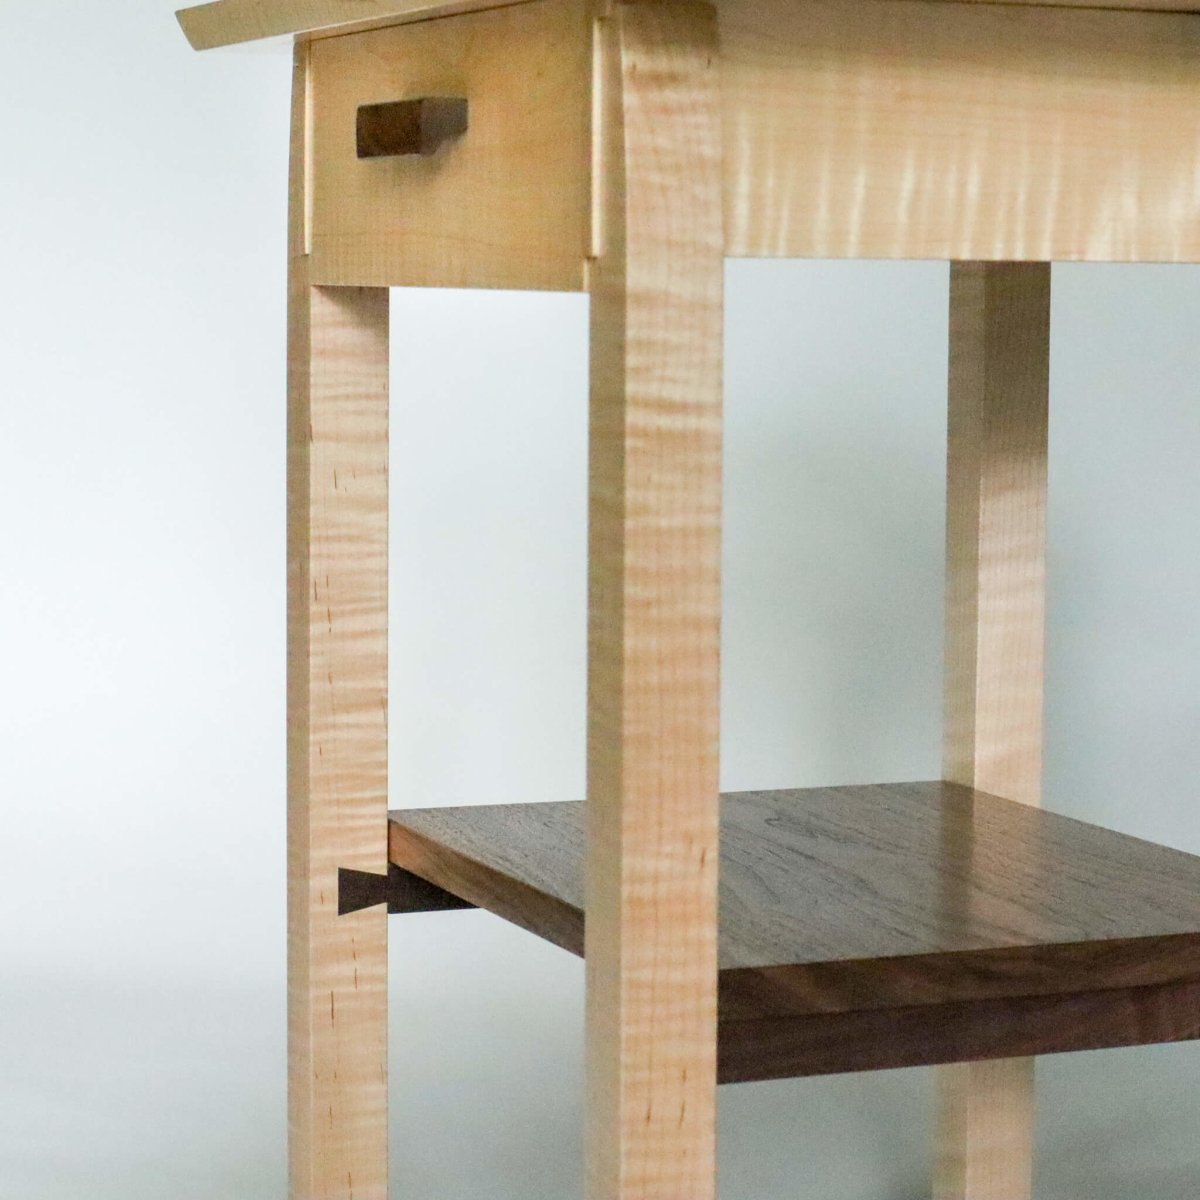 The Signature End Table - small narrow side table/ nightstand